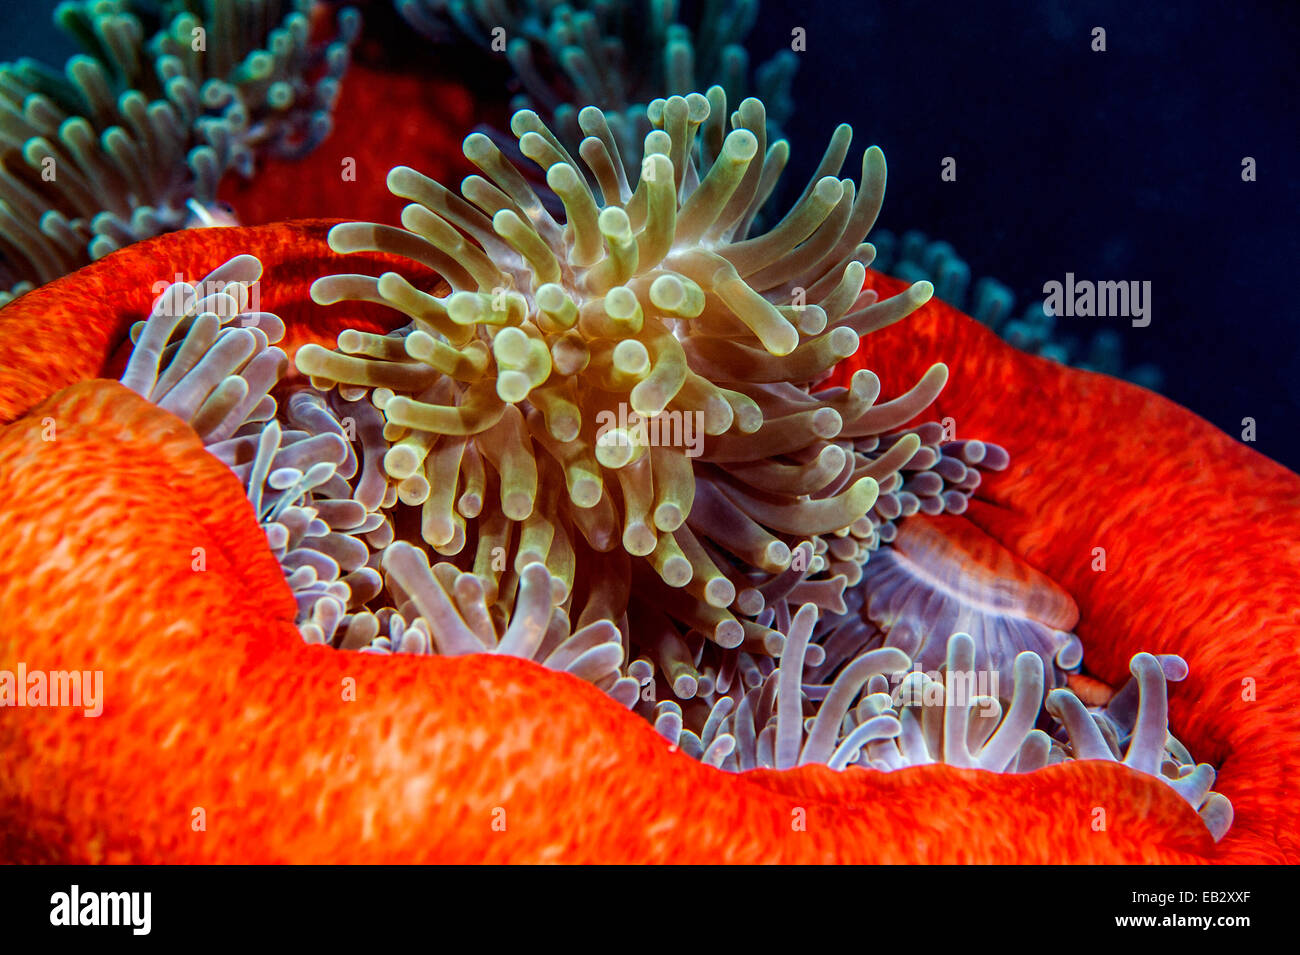 A cluster of stinging tentacles of a bright red Magnificent Sea Anemone. Stock Photo